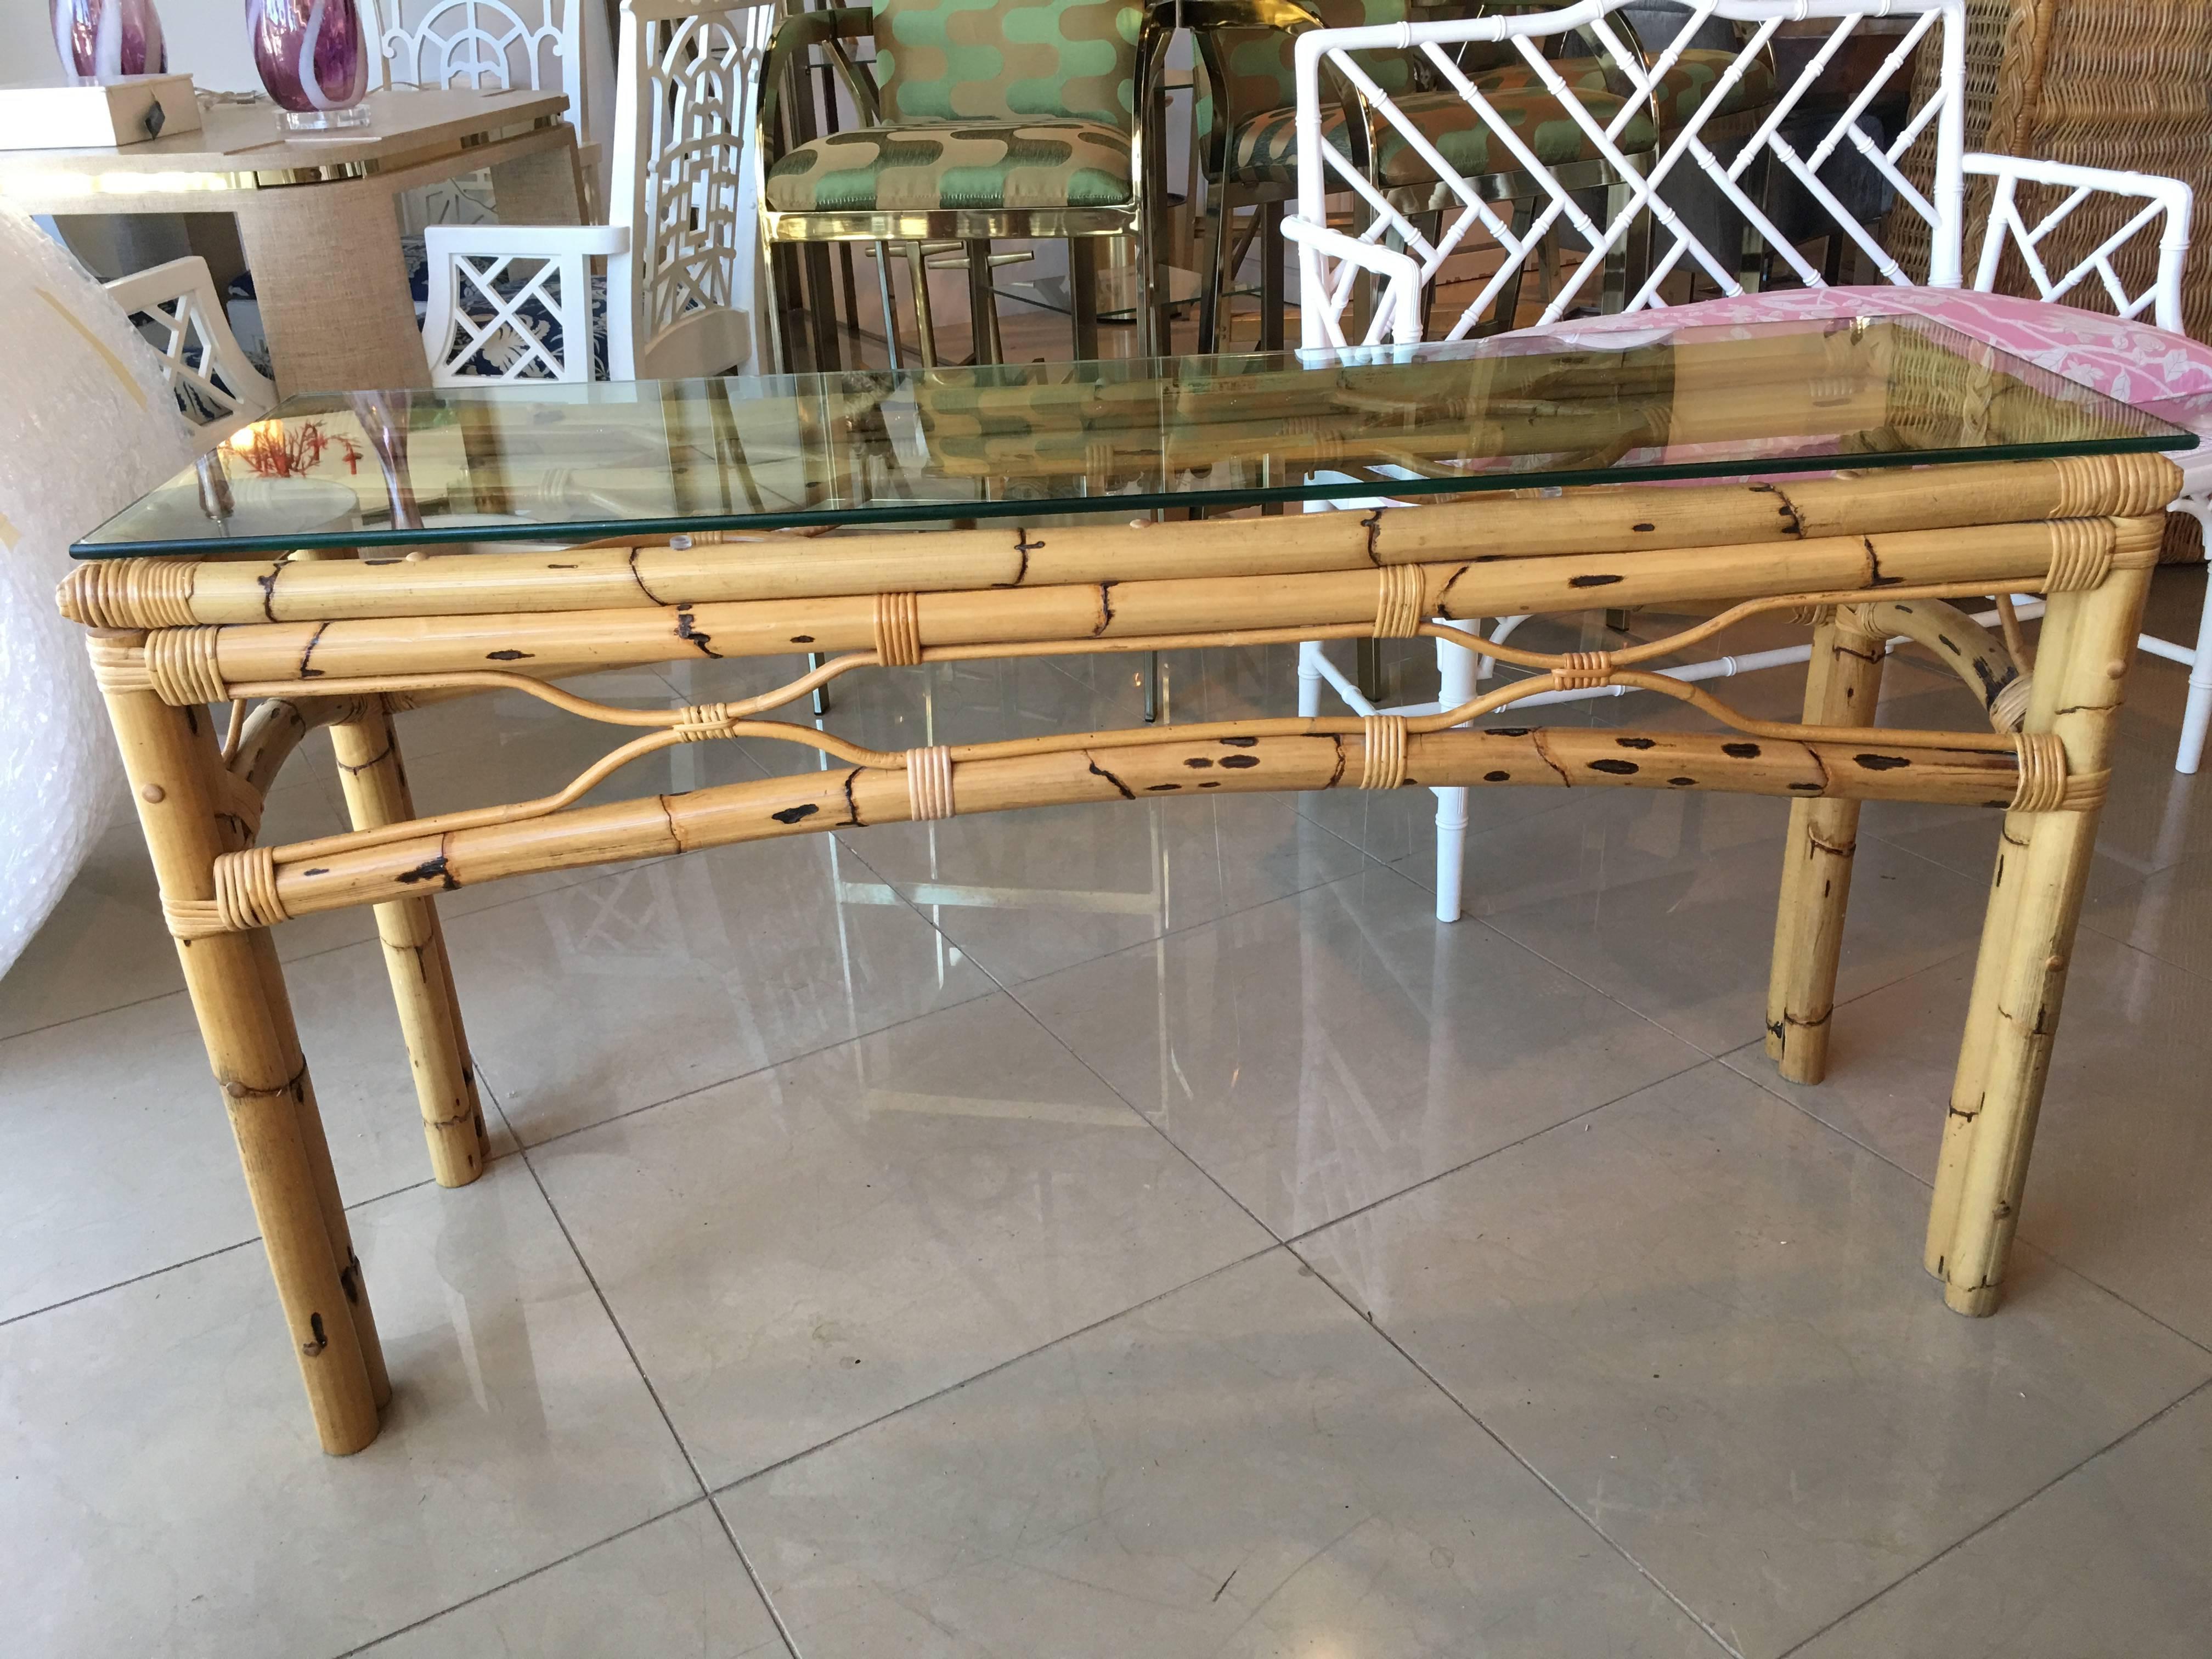 Vintage burnt bamboo rattan console table with glass top. Original glass top may have some surface scratches.
       